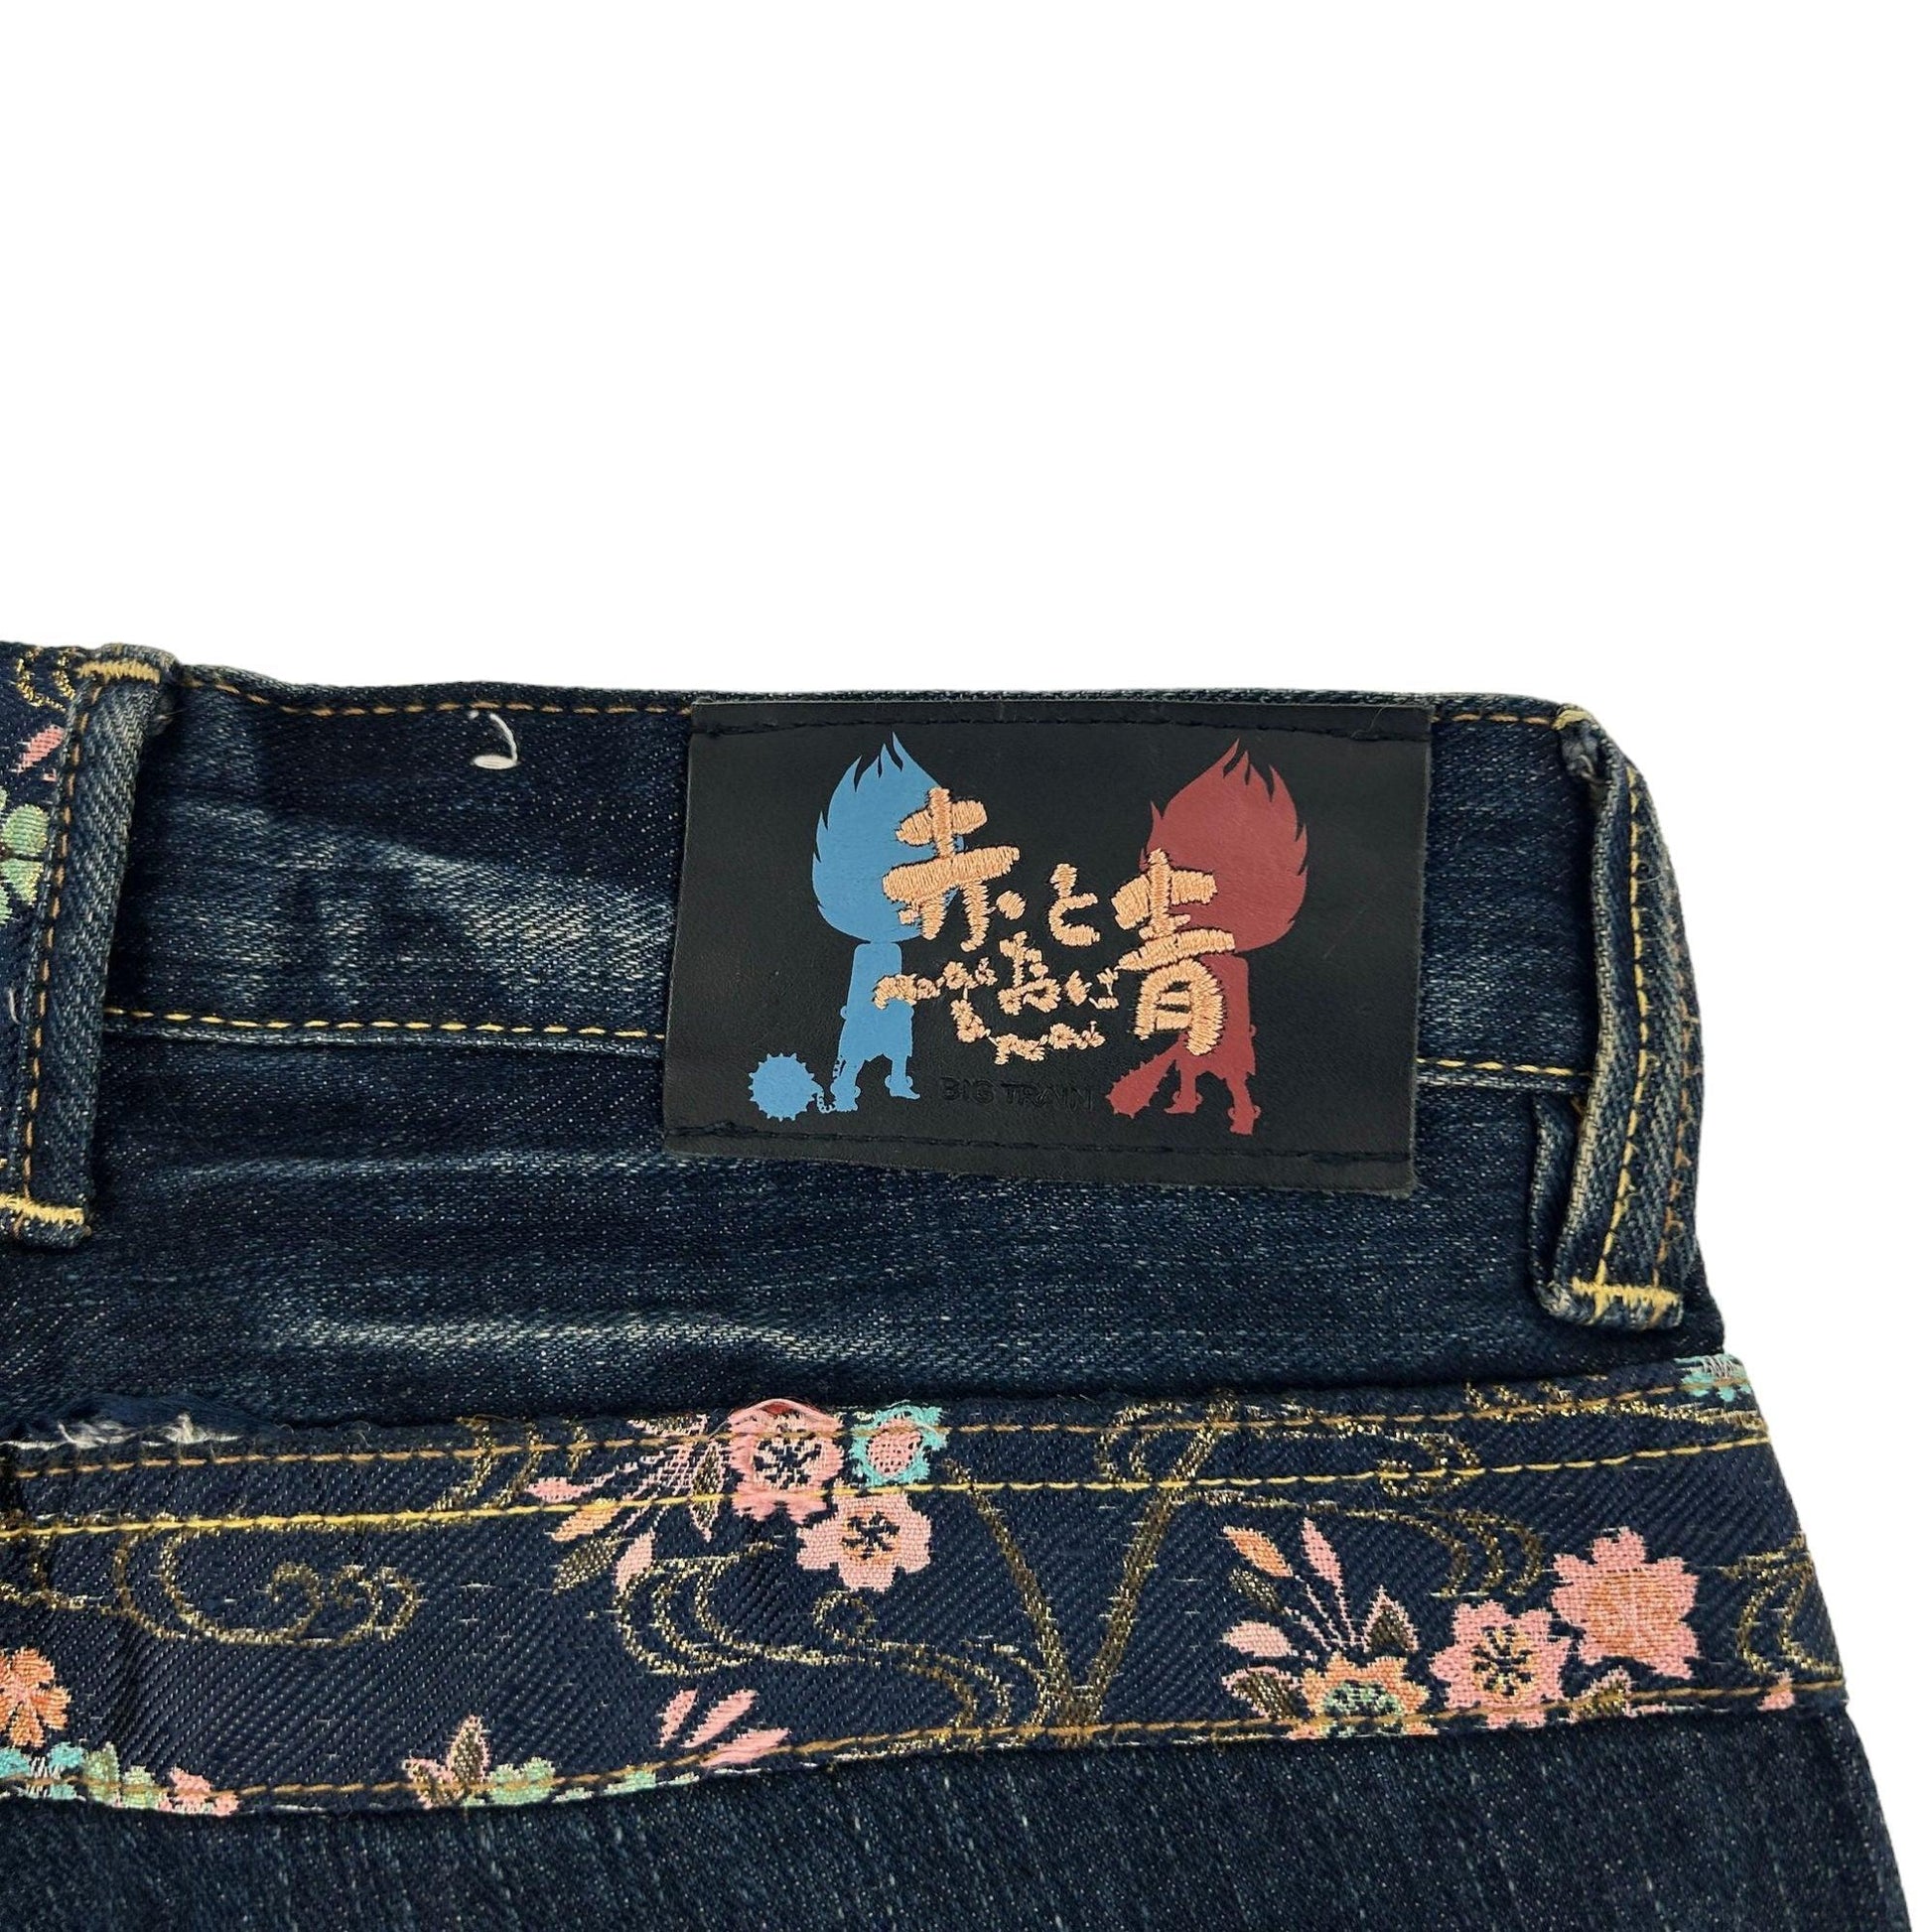 Vintage Japanese Embroidered Denim Jeans Size W29 - Known Source